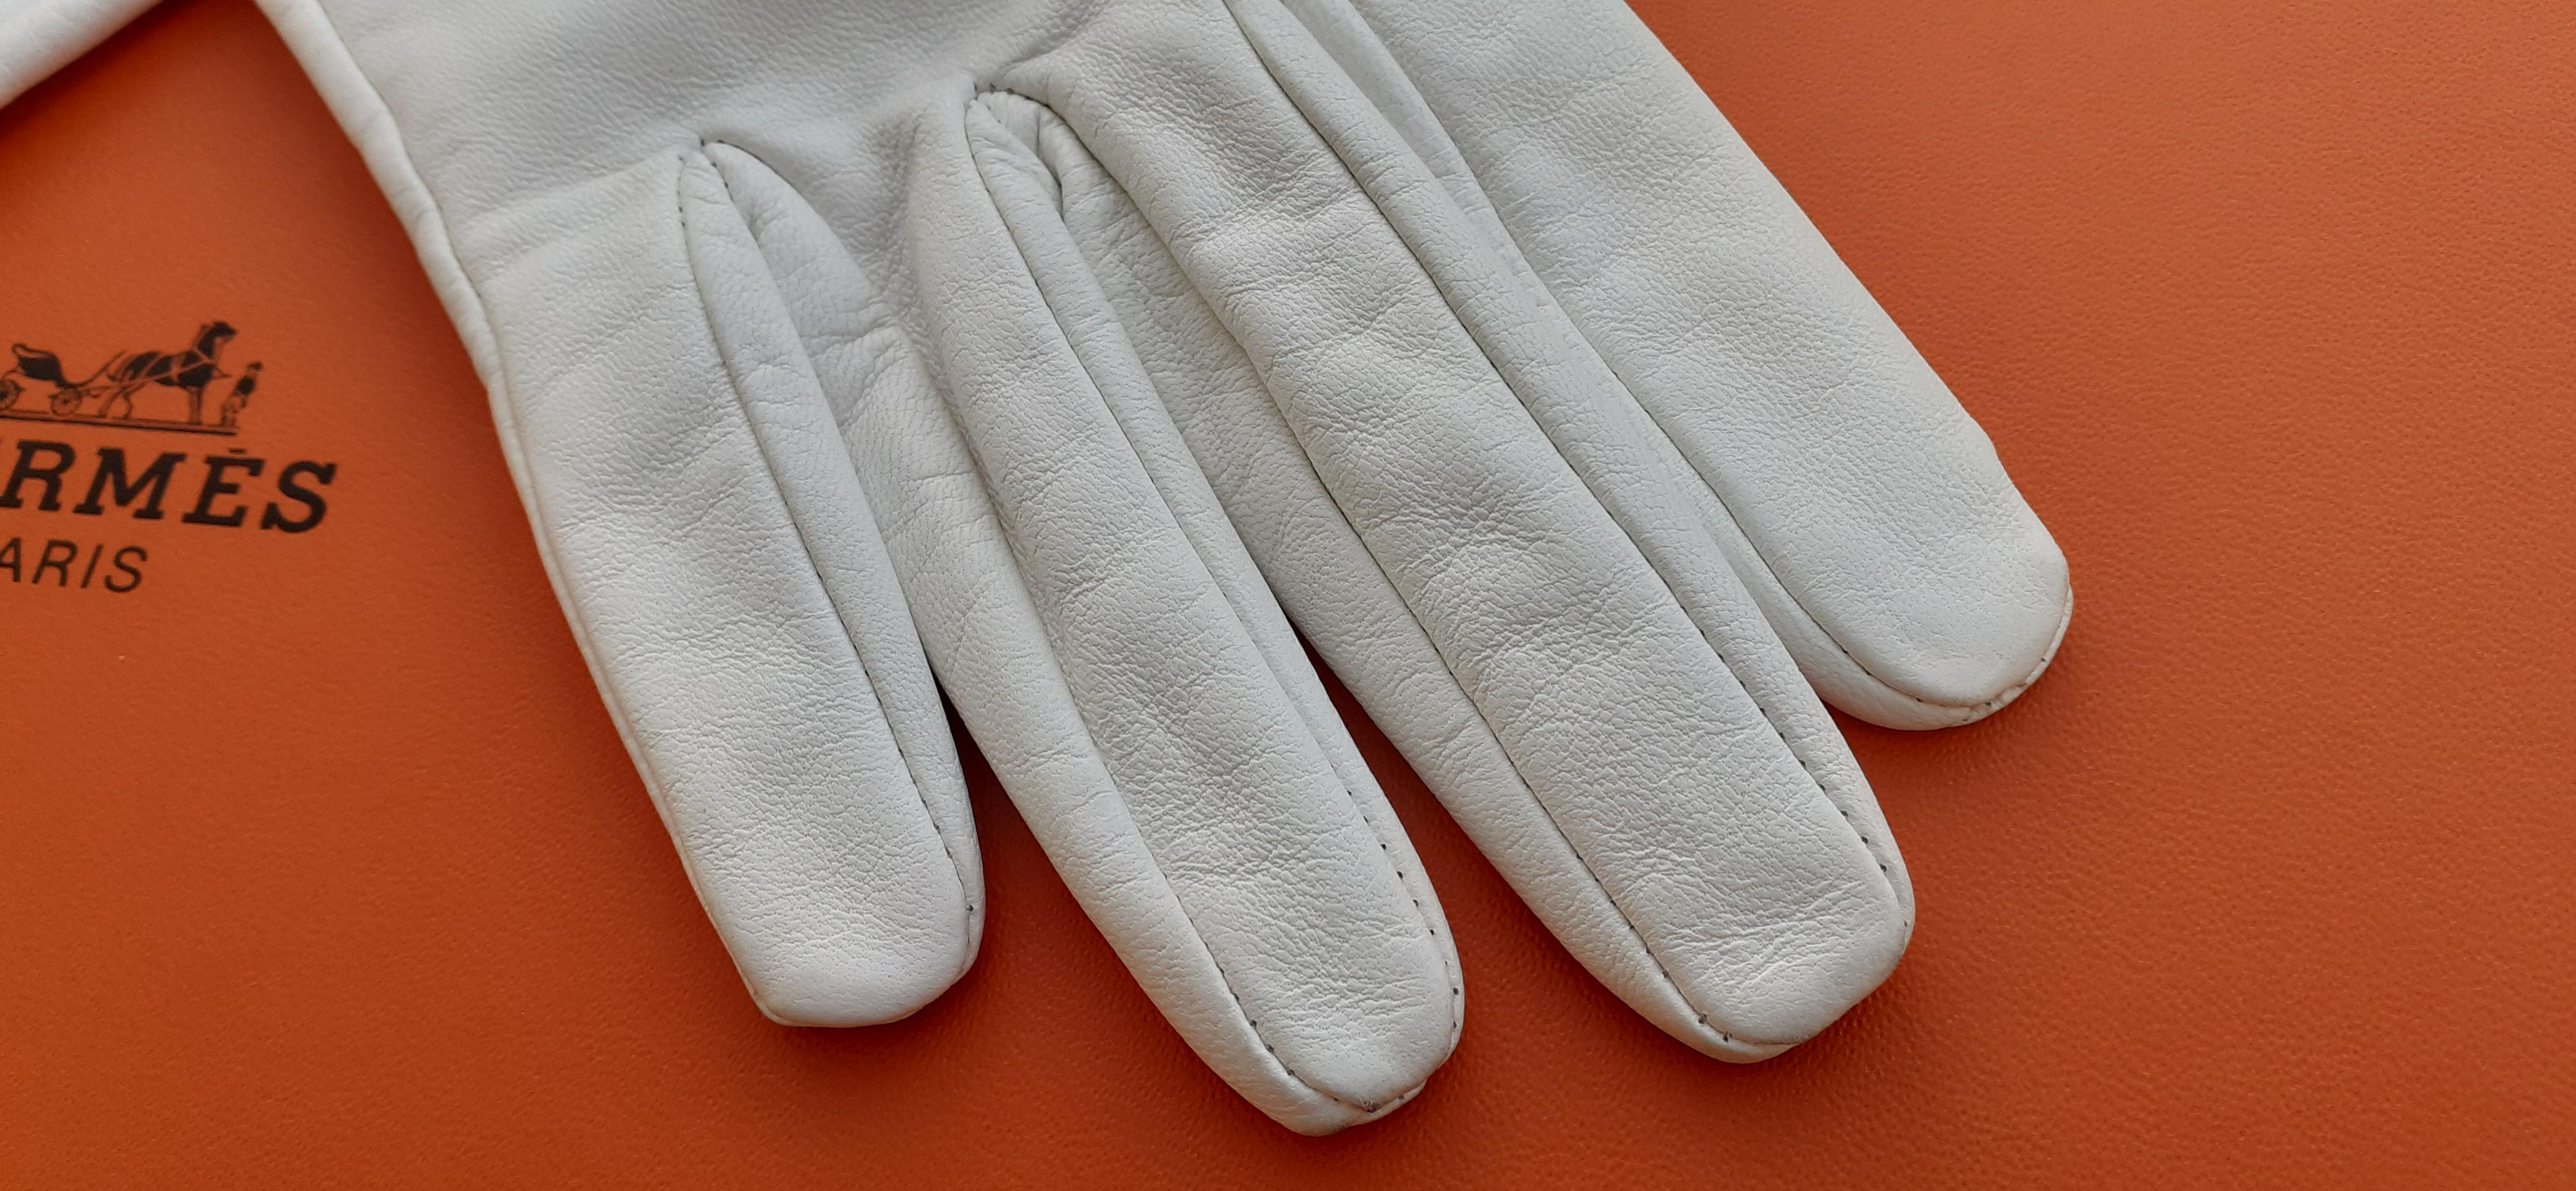 Women's Lovely Hermès White Leather and Silk Gloves Ghillies Size 6.5 For Sale